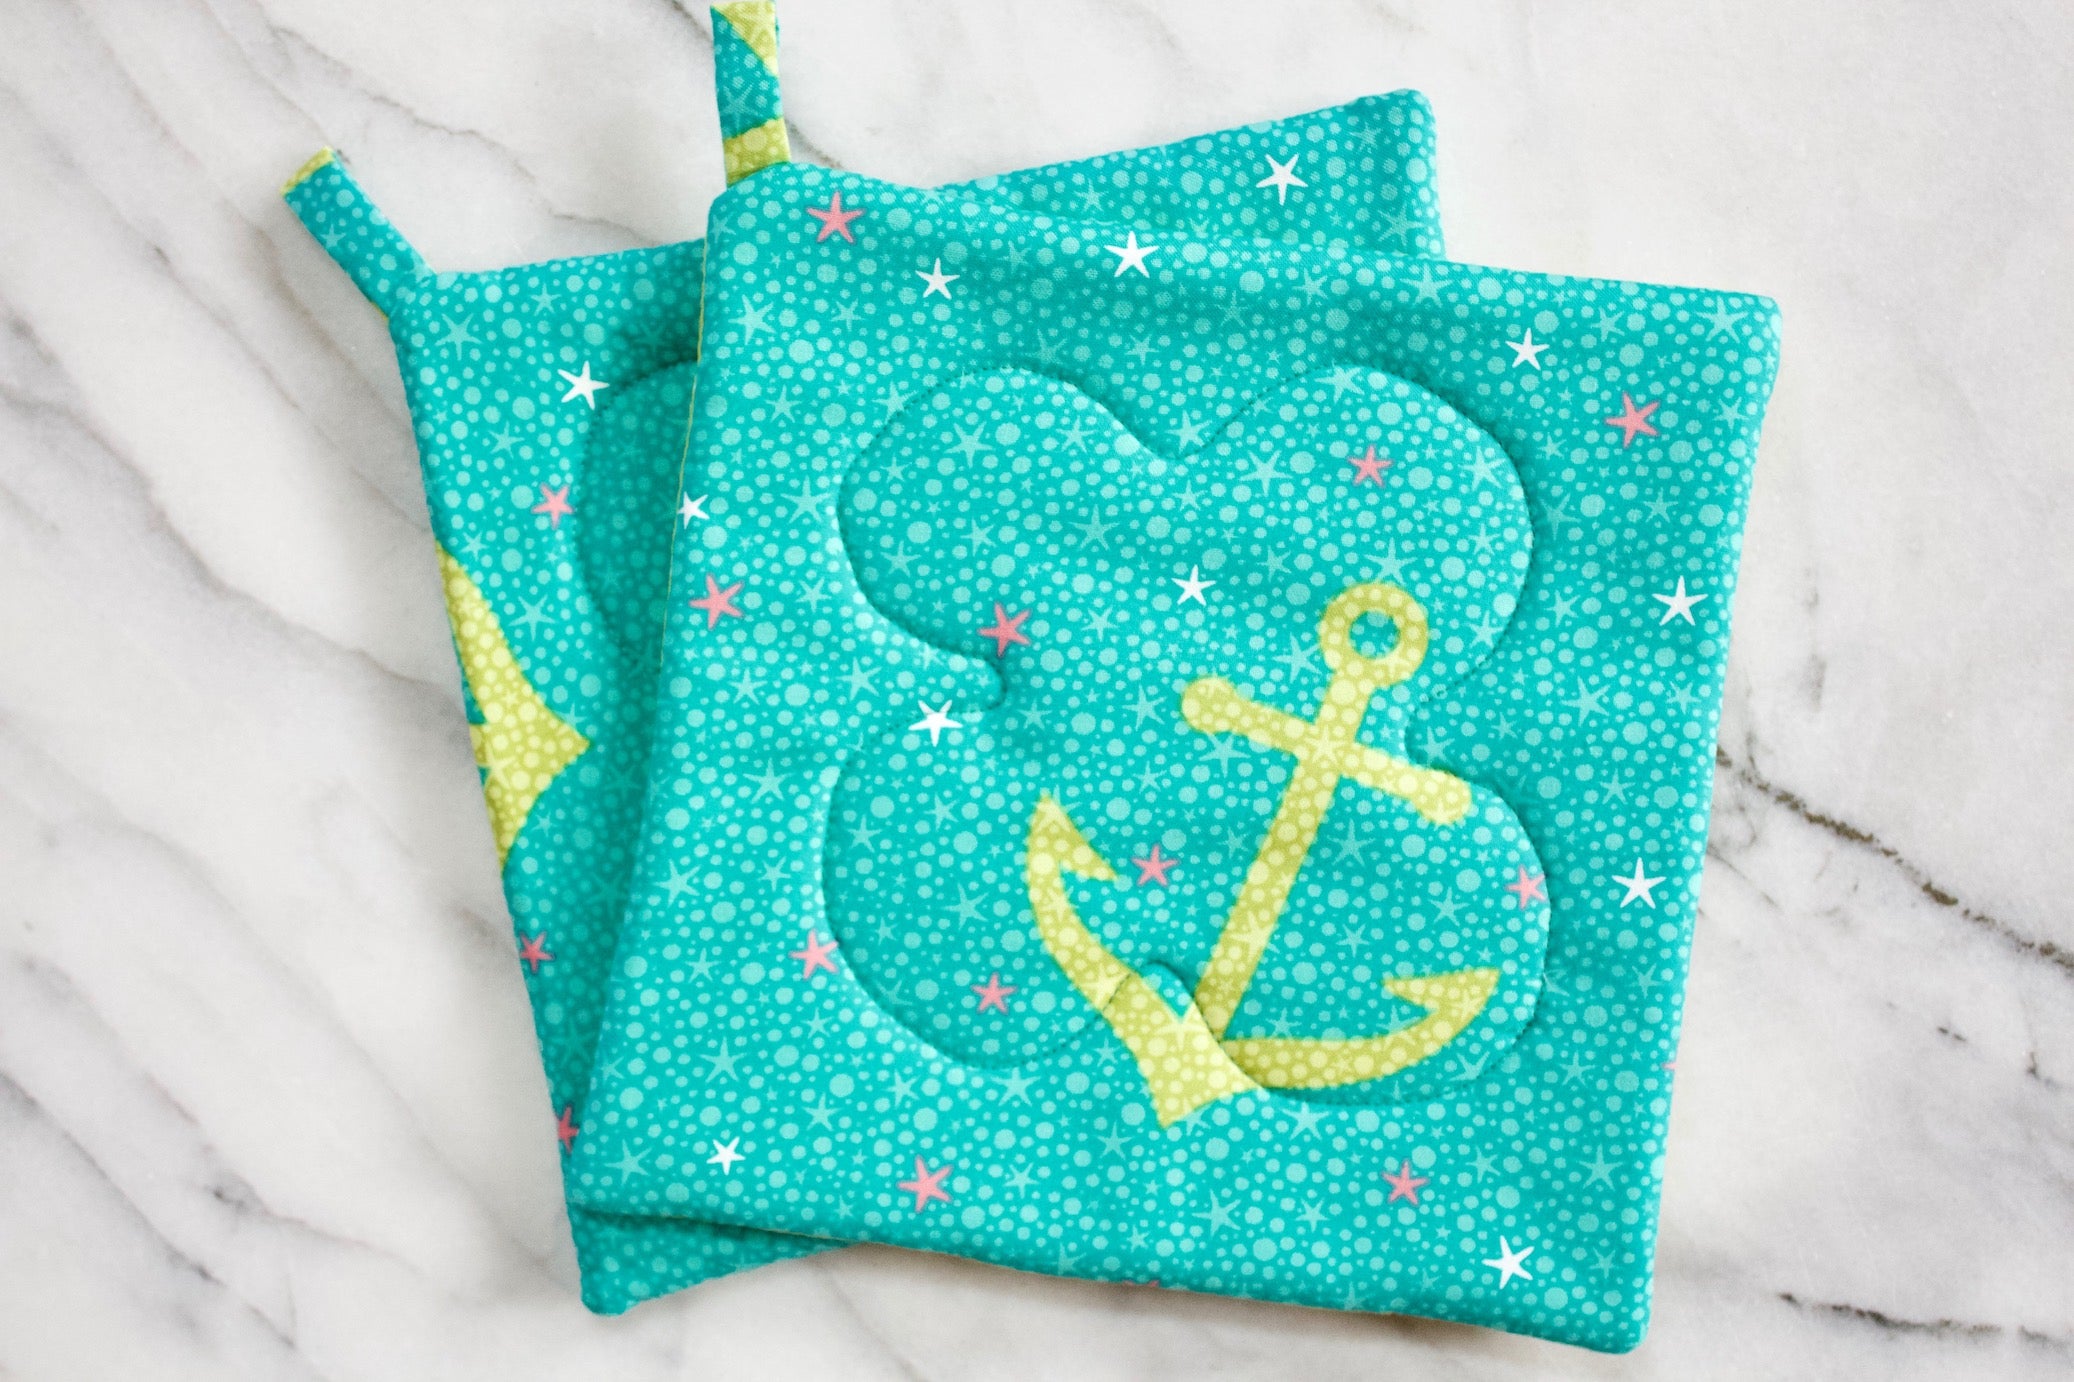 Anchors Away Potholder-The Blue Peony-Category_Pot Holder,Color_Teal,Department_Kitchen,Size_Traditional (Square),Theme_Water Life